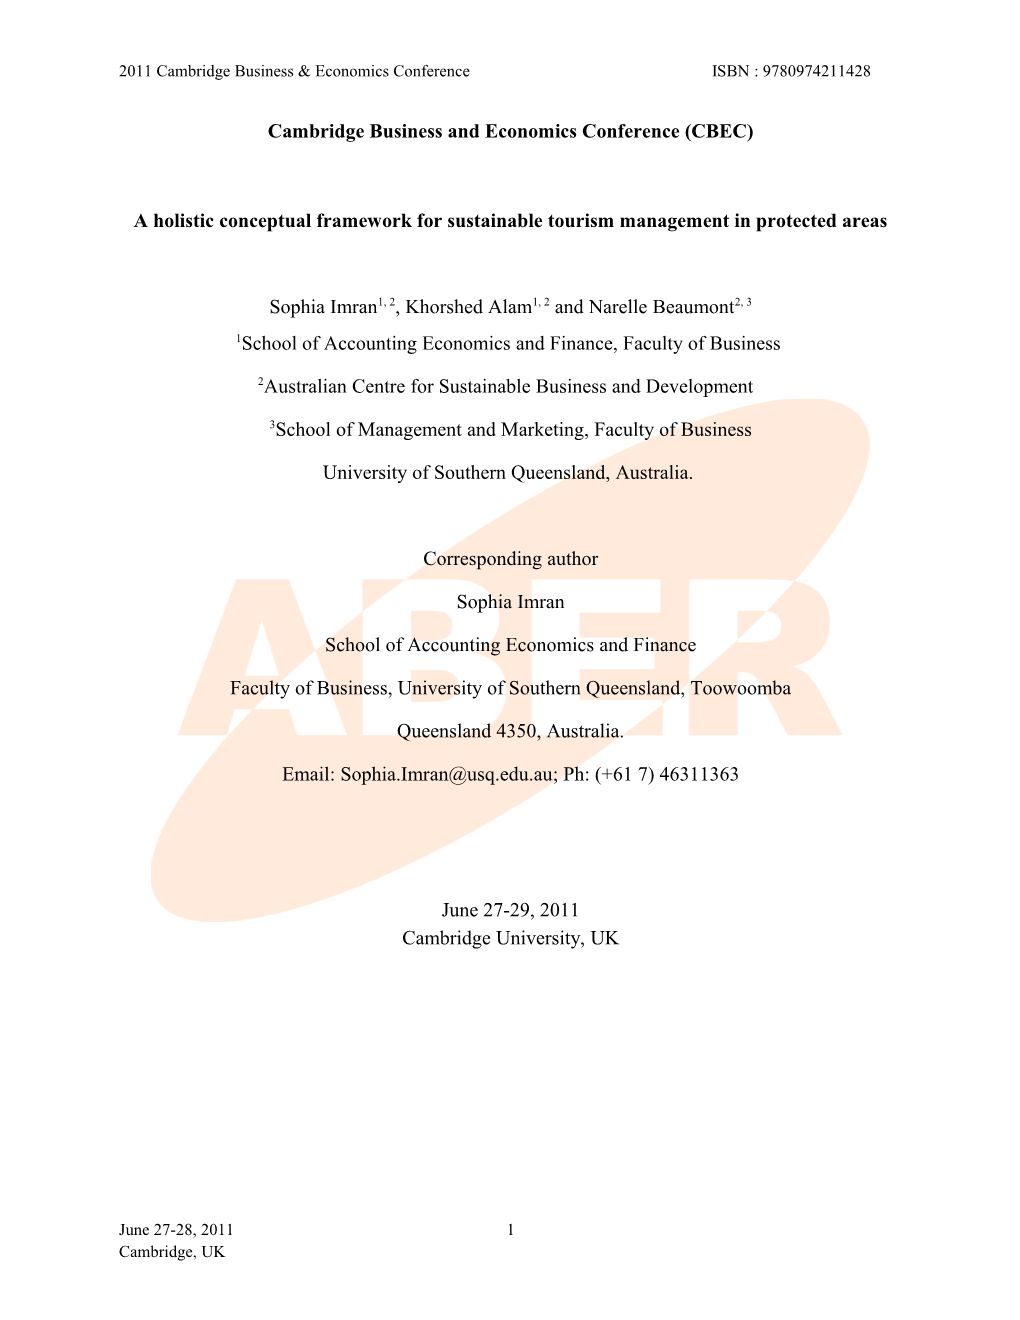 A Holistic Conceptual Framework for Sustainable Tourism Management in Protected Areas